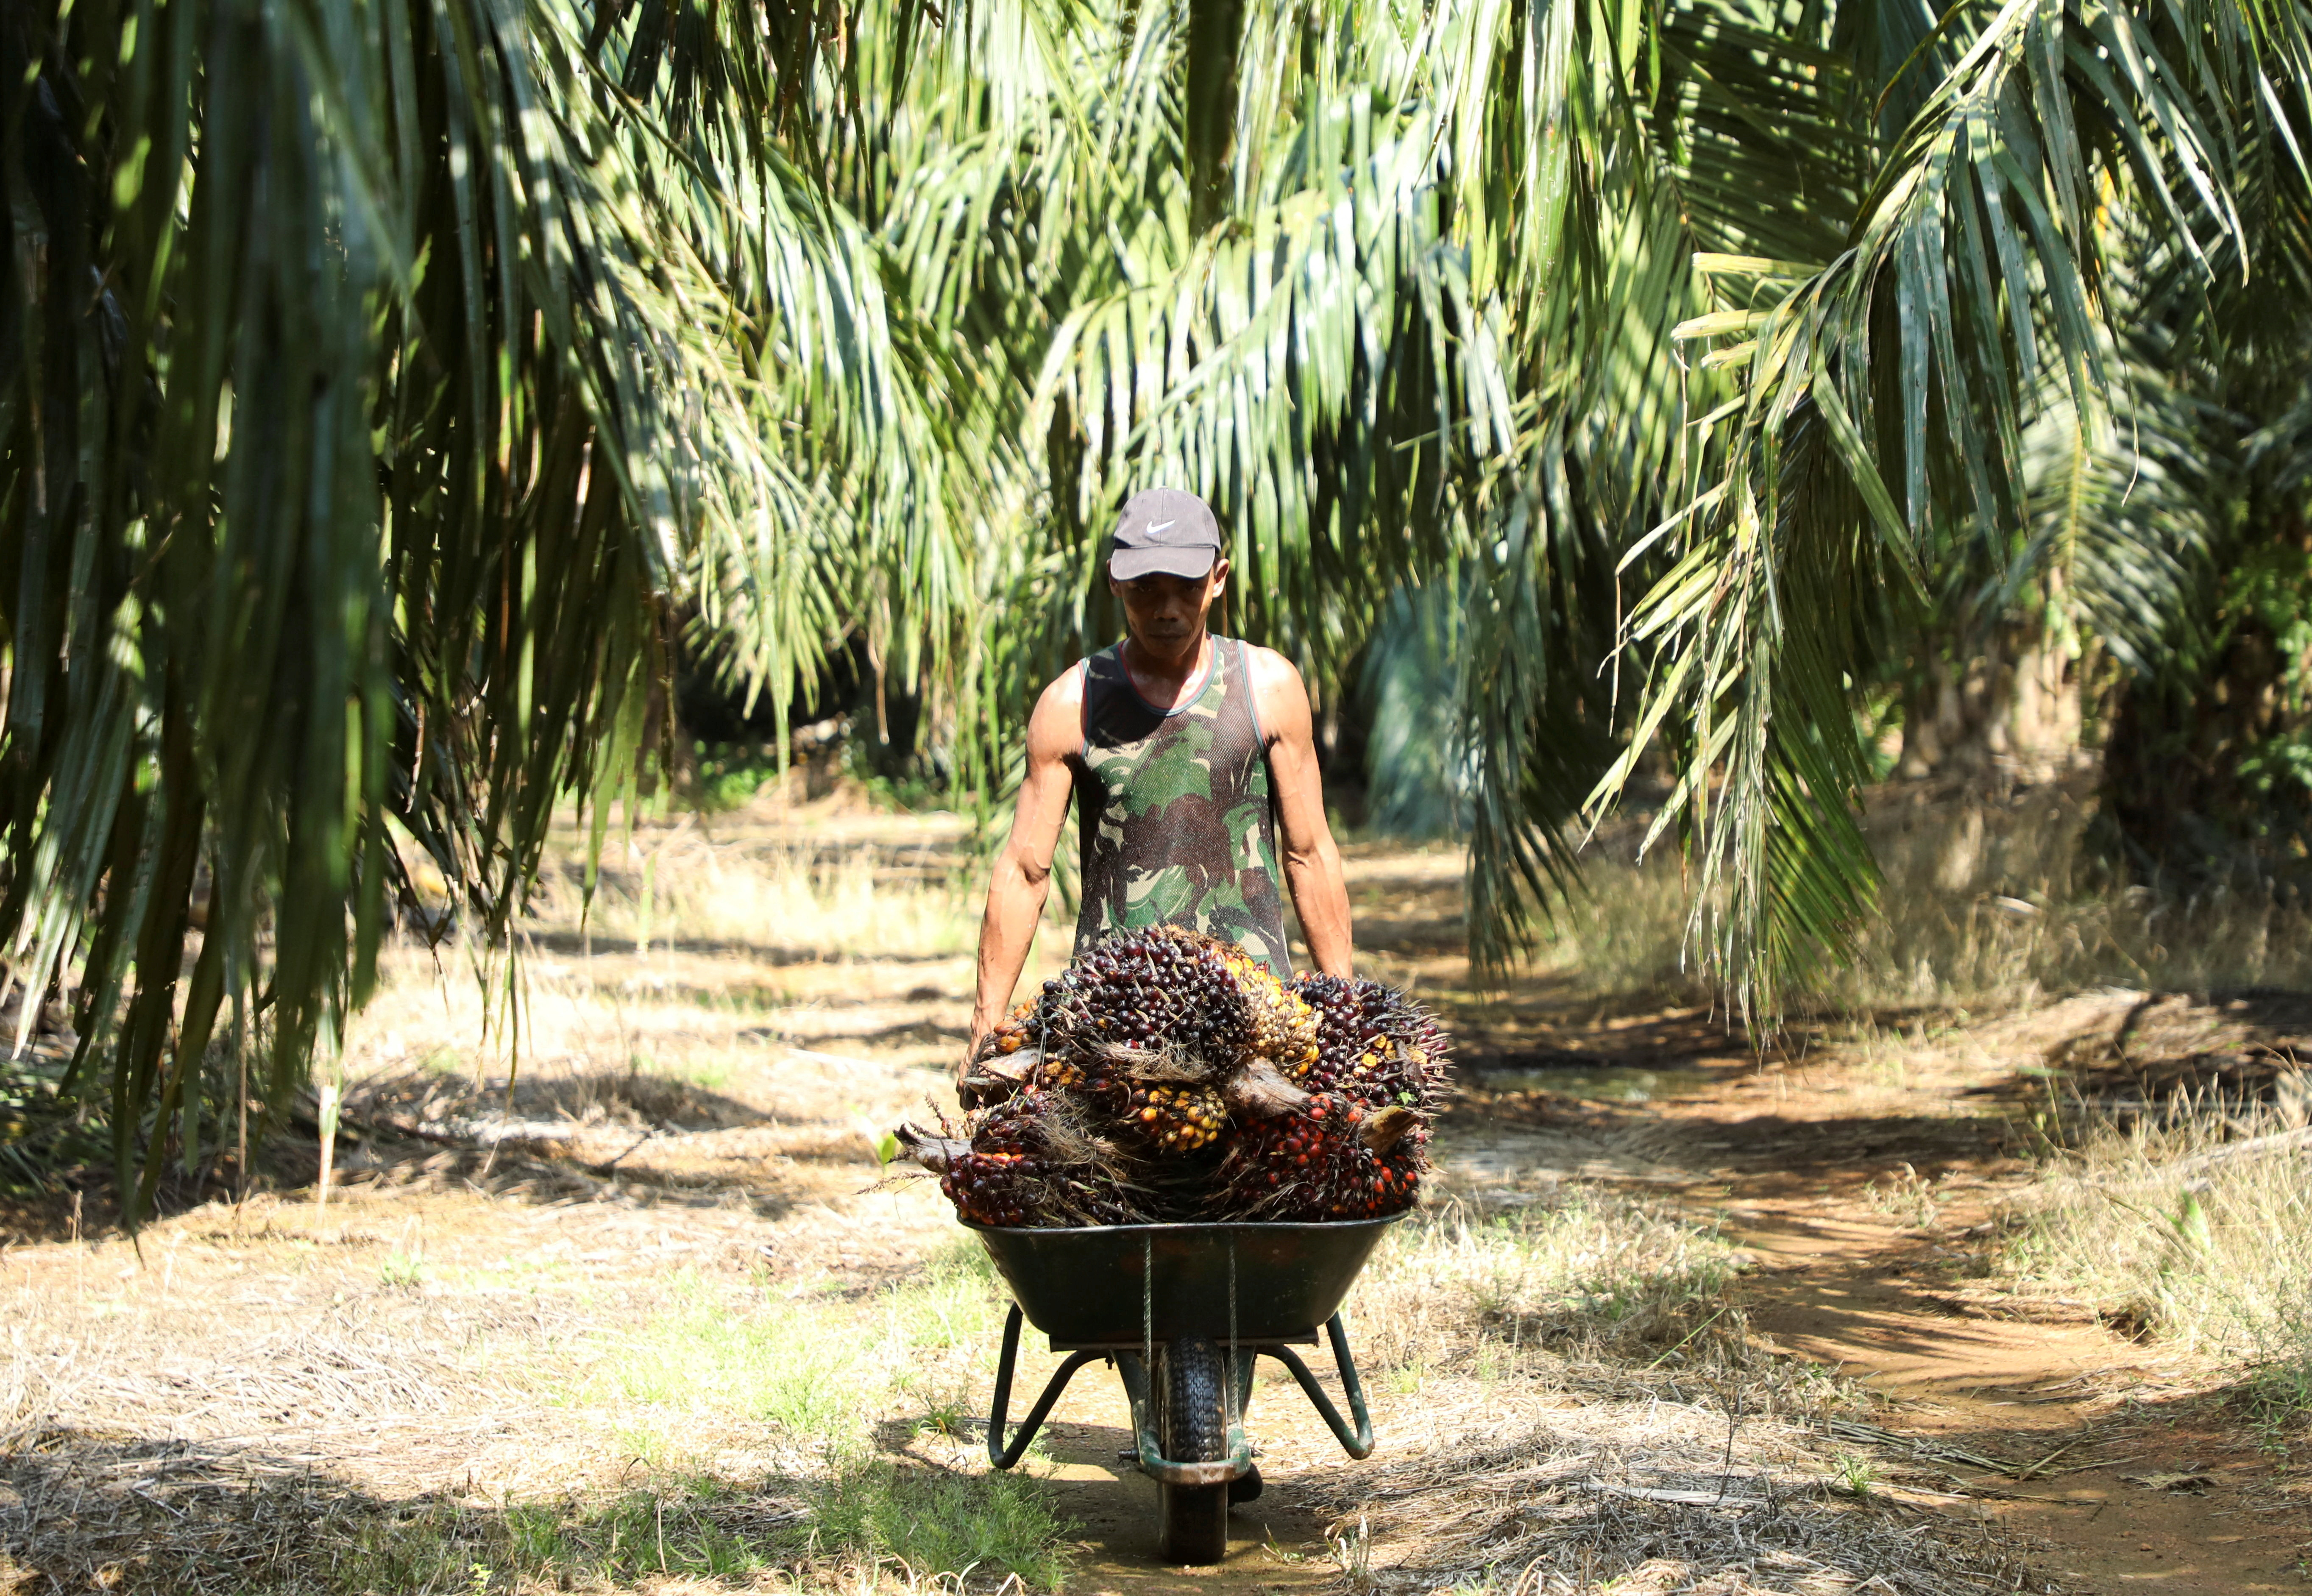 A worker pushes a wheelbarrow of fresh fruit bunches of oil palm tree during harvest at a palm oil plantation in Kuala Selangor